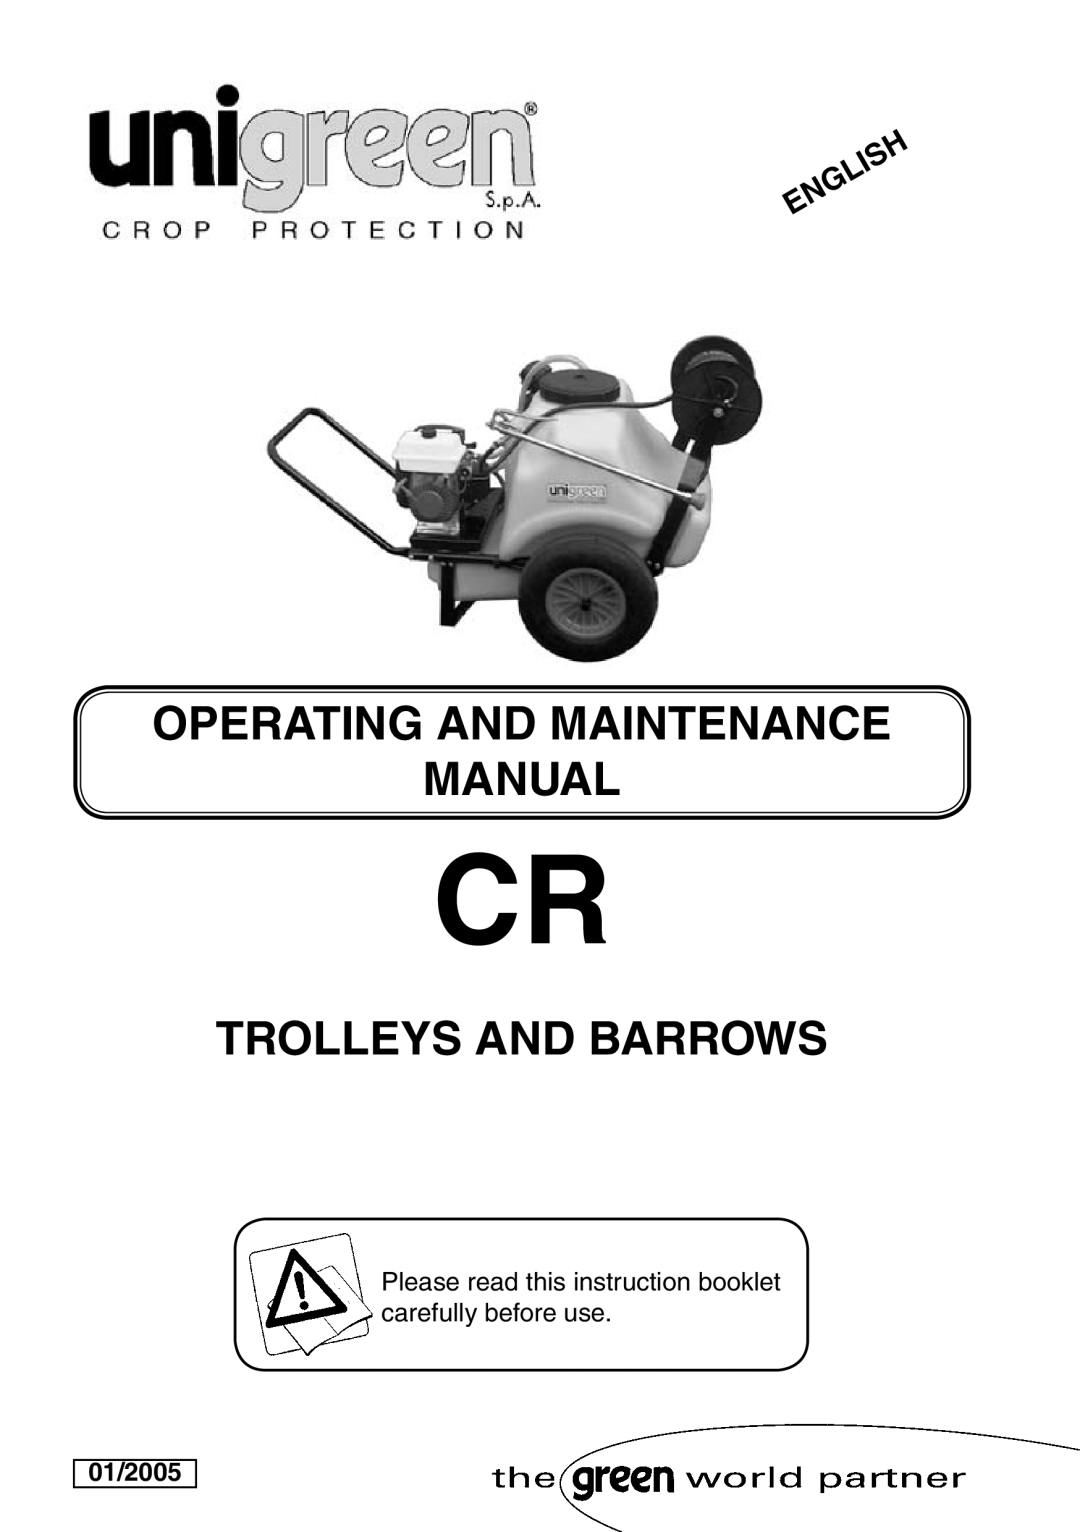 Unigreen Trolleys and Barrows manual Please read this instruction booklet carefully before use, Trolleys And Barrows 